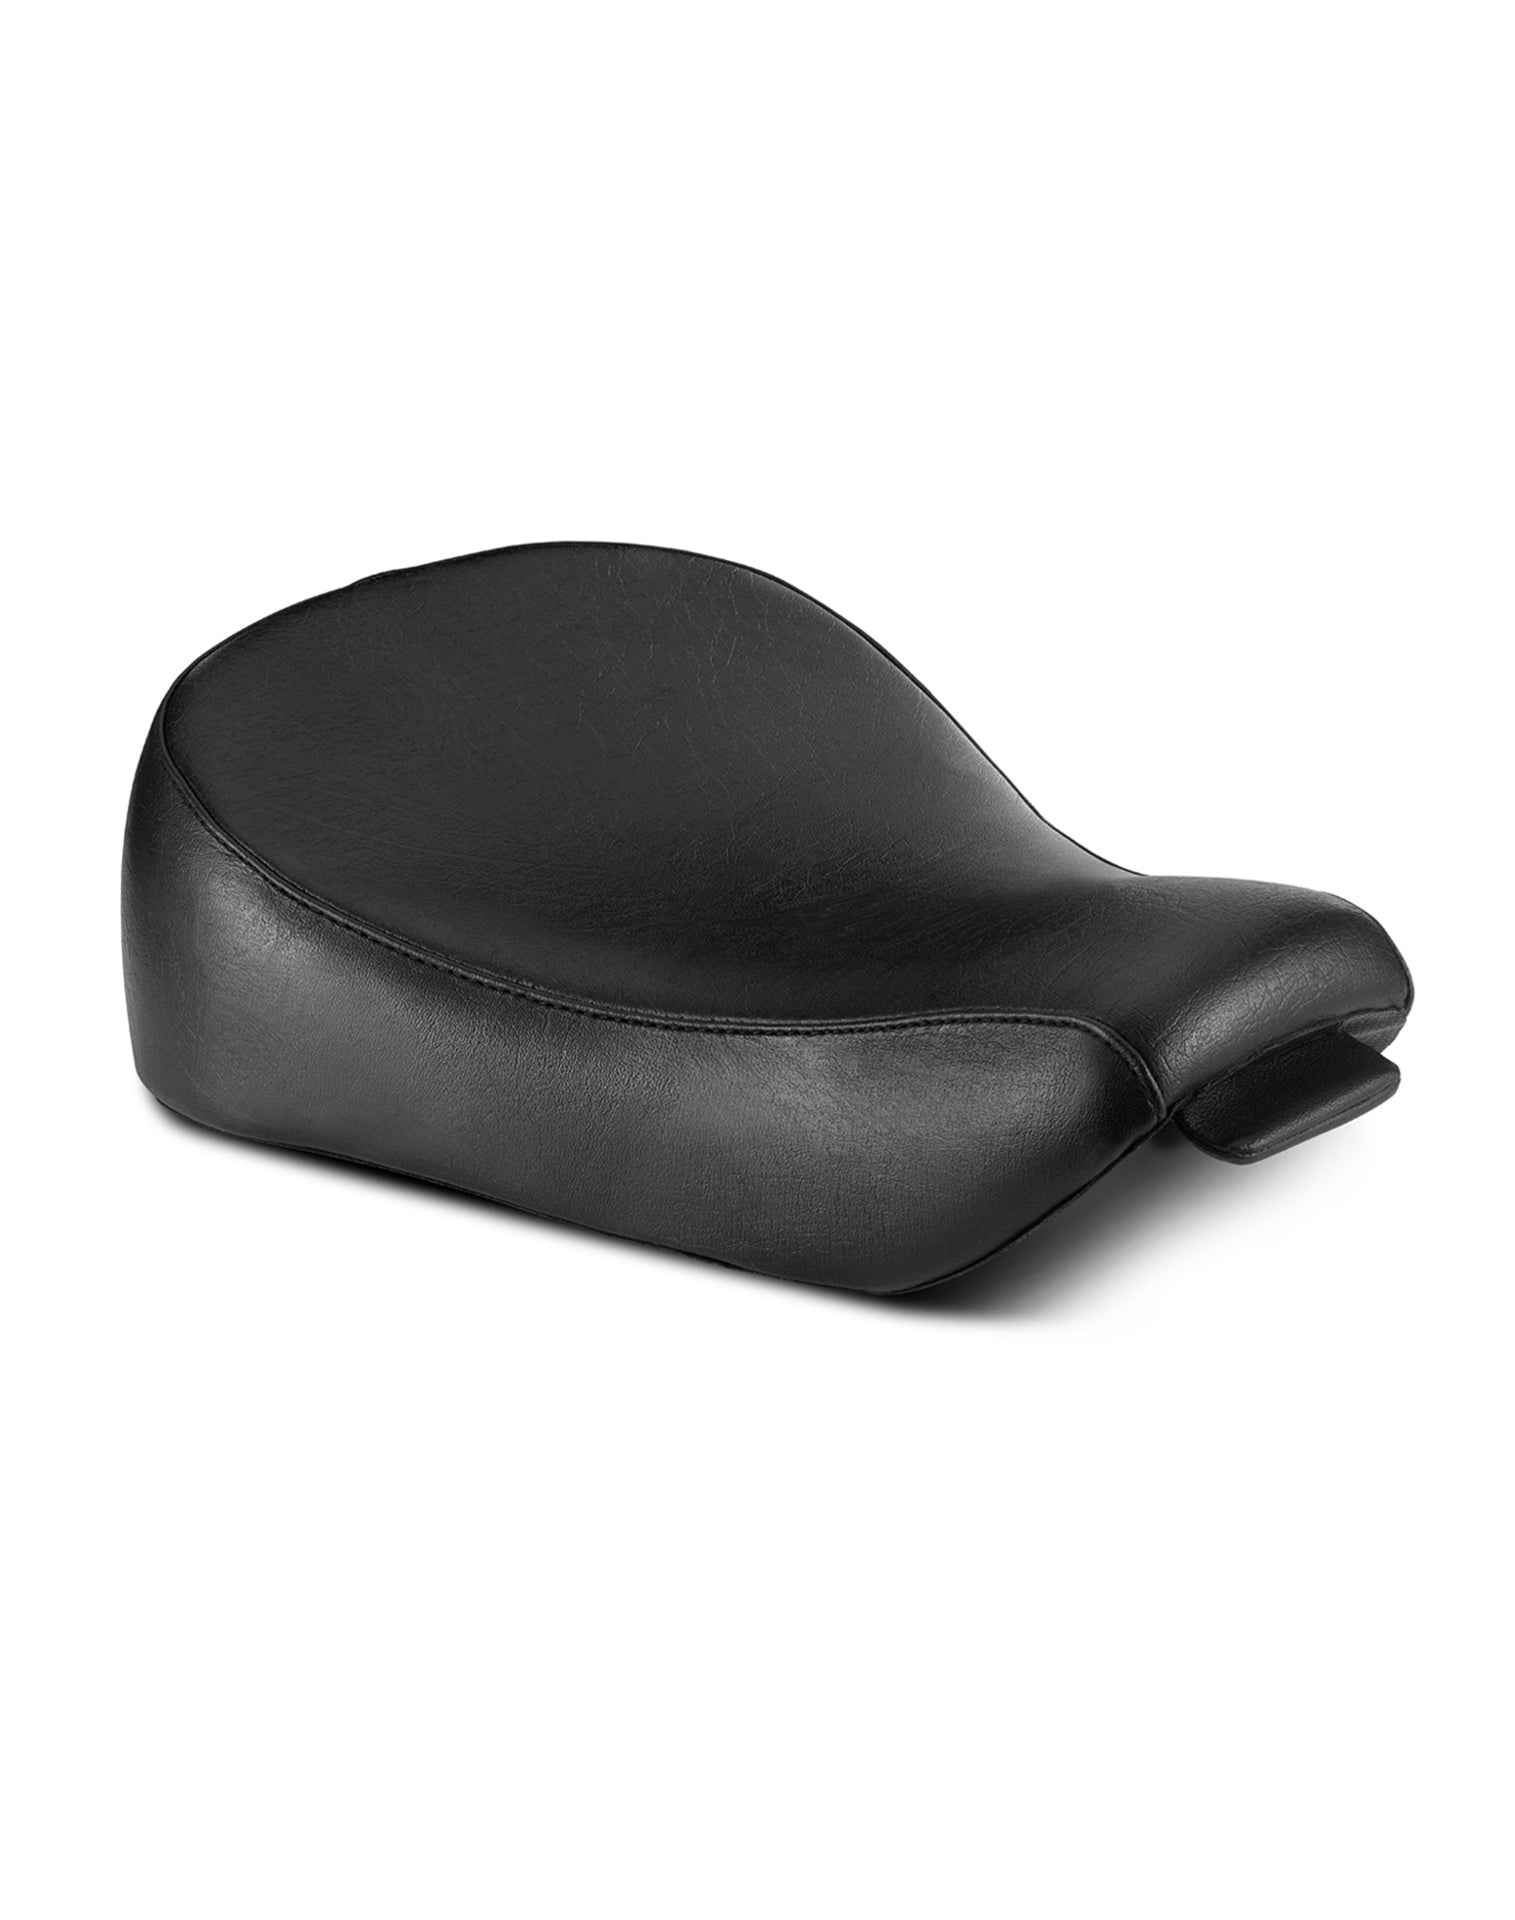 Iron Born Plain Design Motorcycle Solo Seat for Sportster 1200 Custom XL1200C Main view